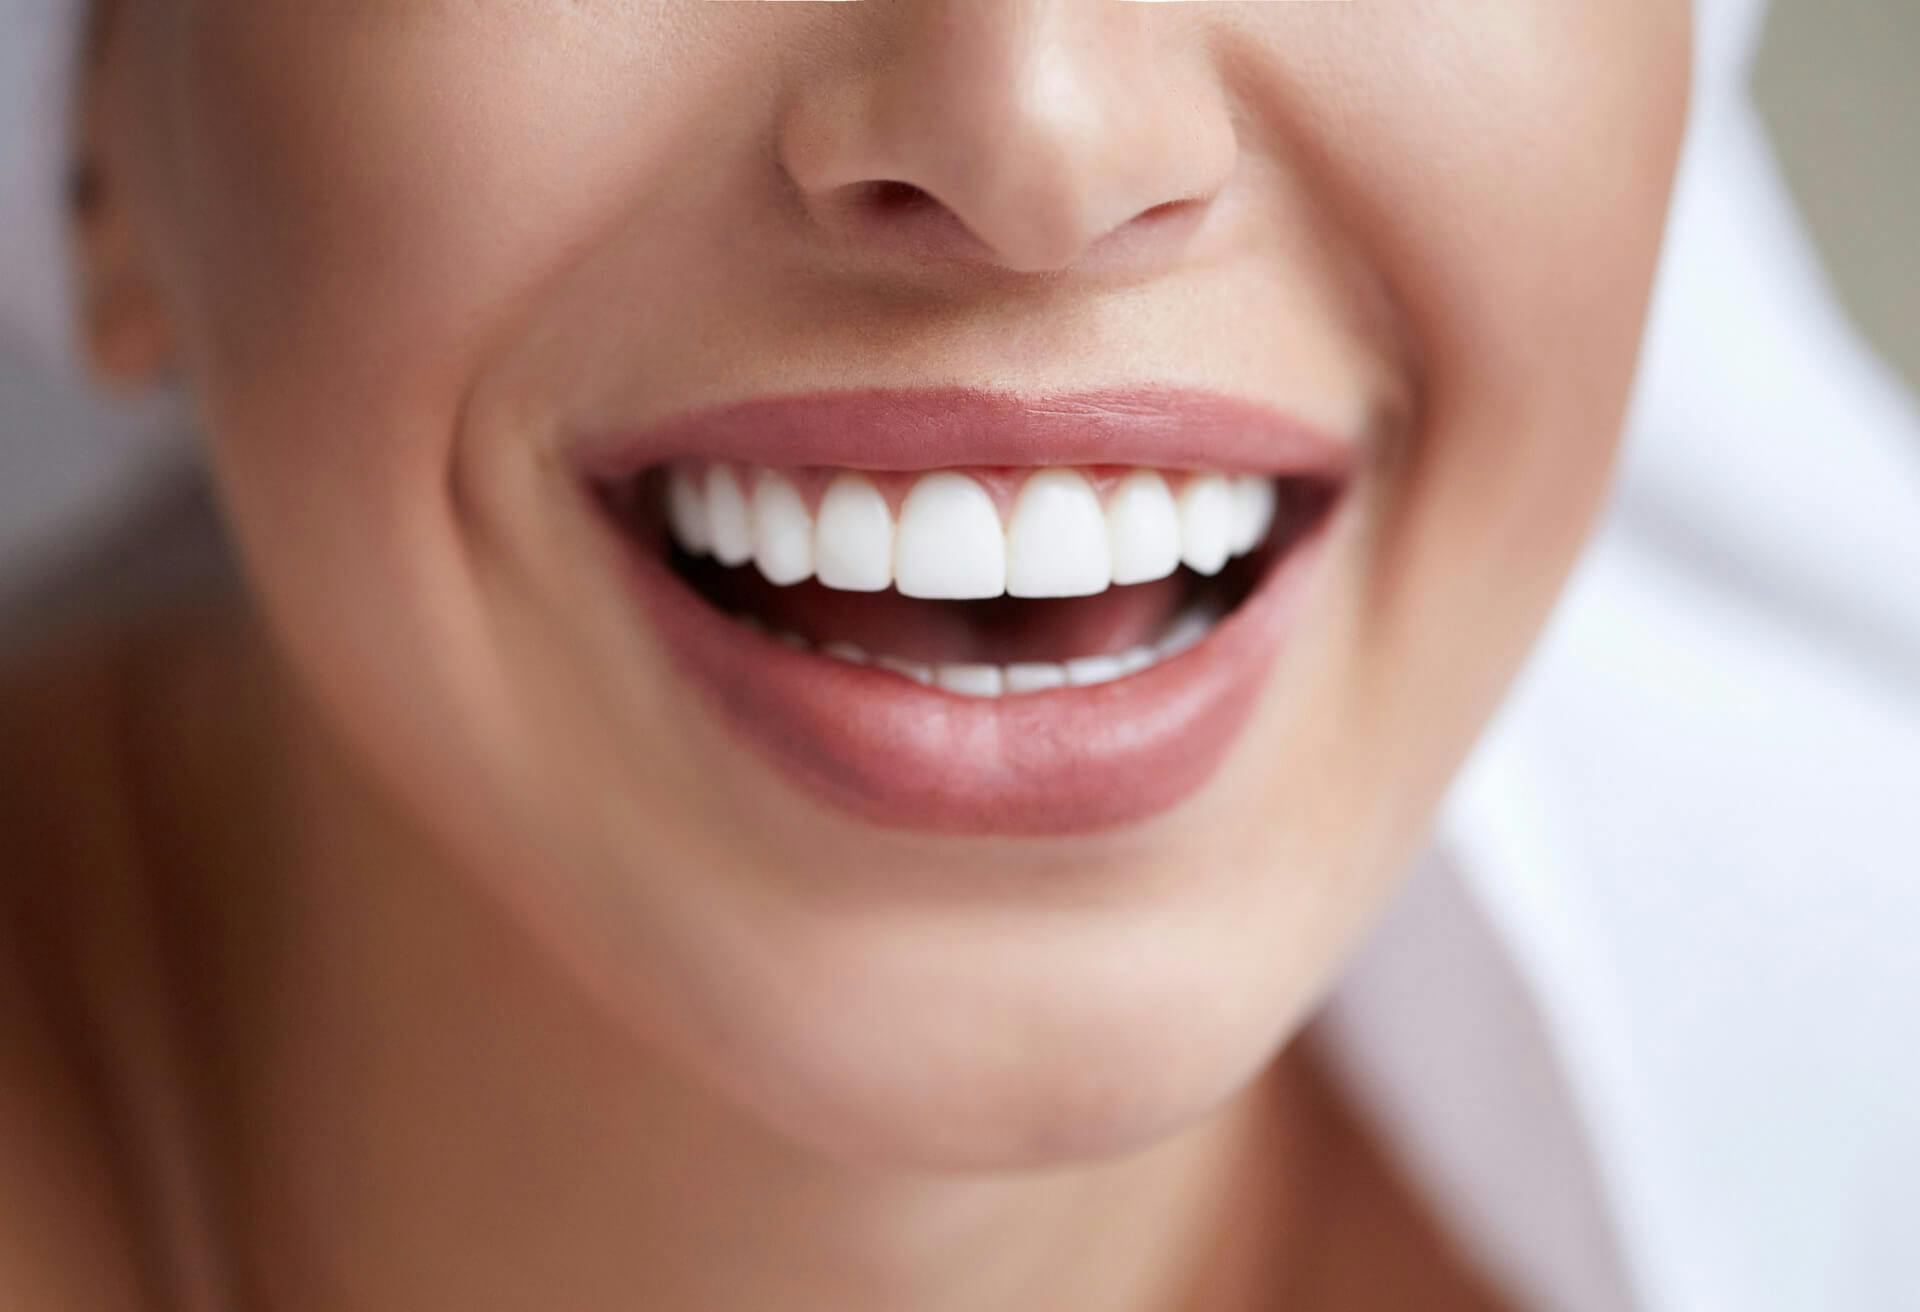 Woman's mouth smiling with perfect white teeth